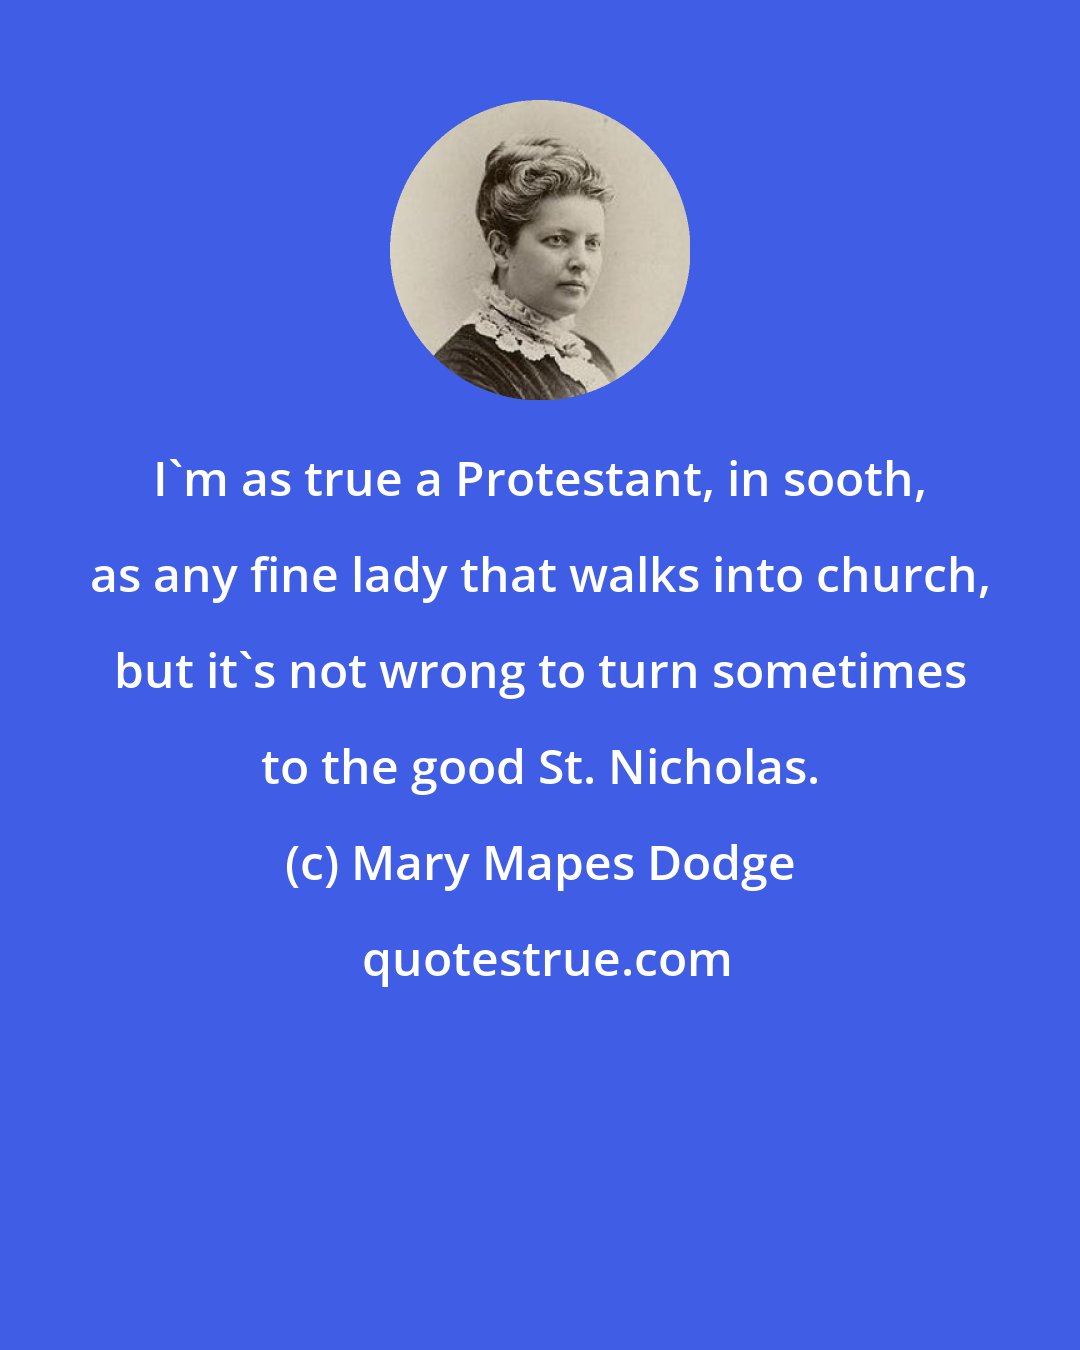 Mary Mapes Dodge: I'm as true a Protestant, in sooth, as any fine lady that walks into church, but it's not wrong to turn sometimes to the good St. Nicholas.